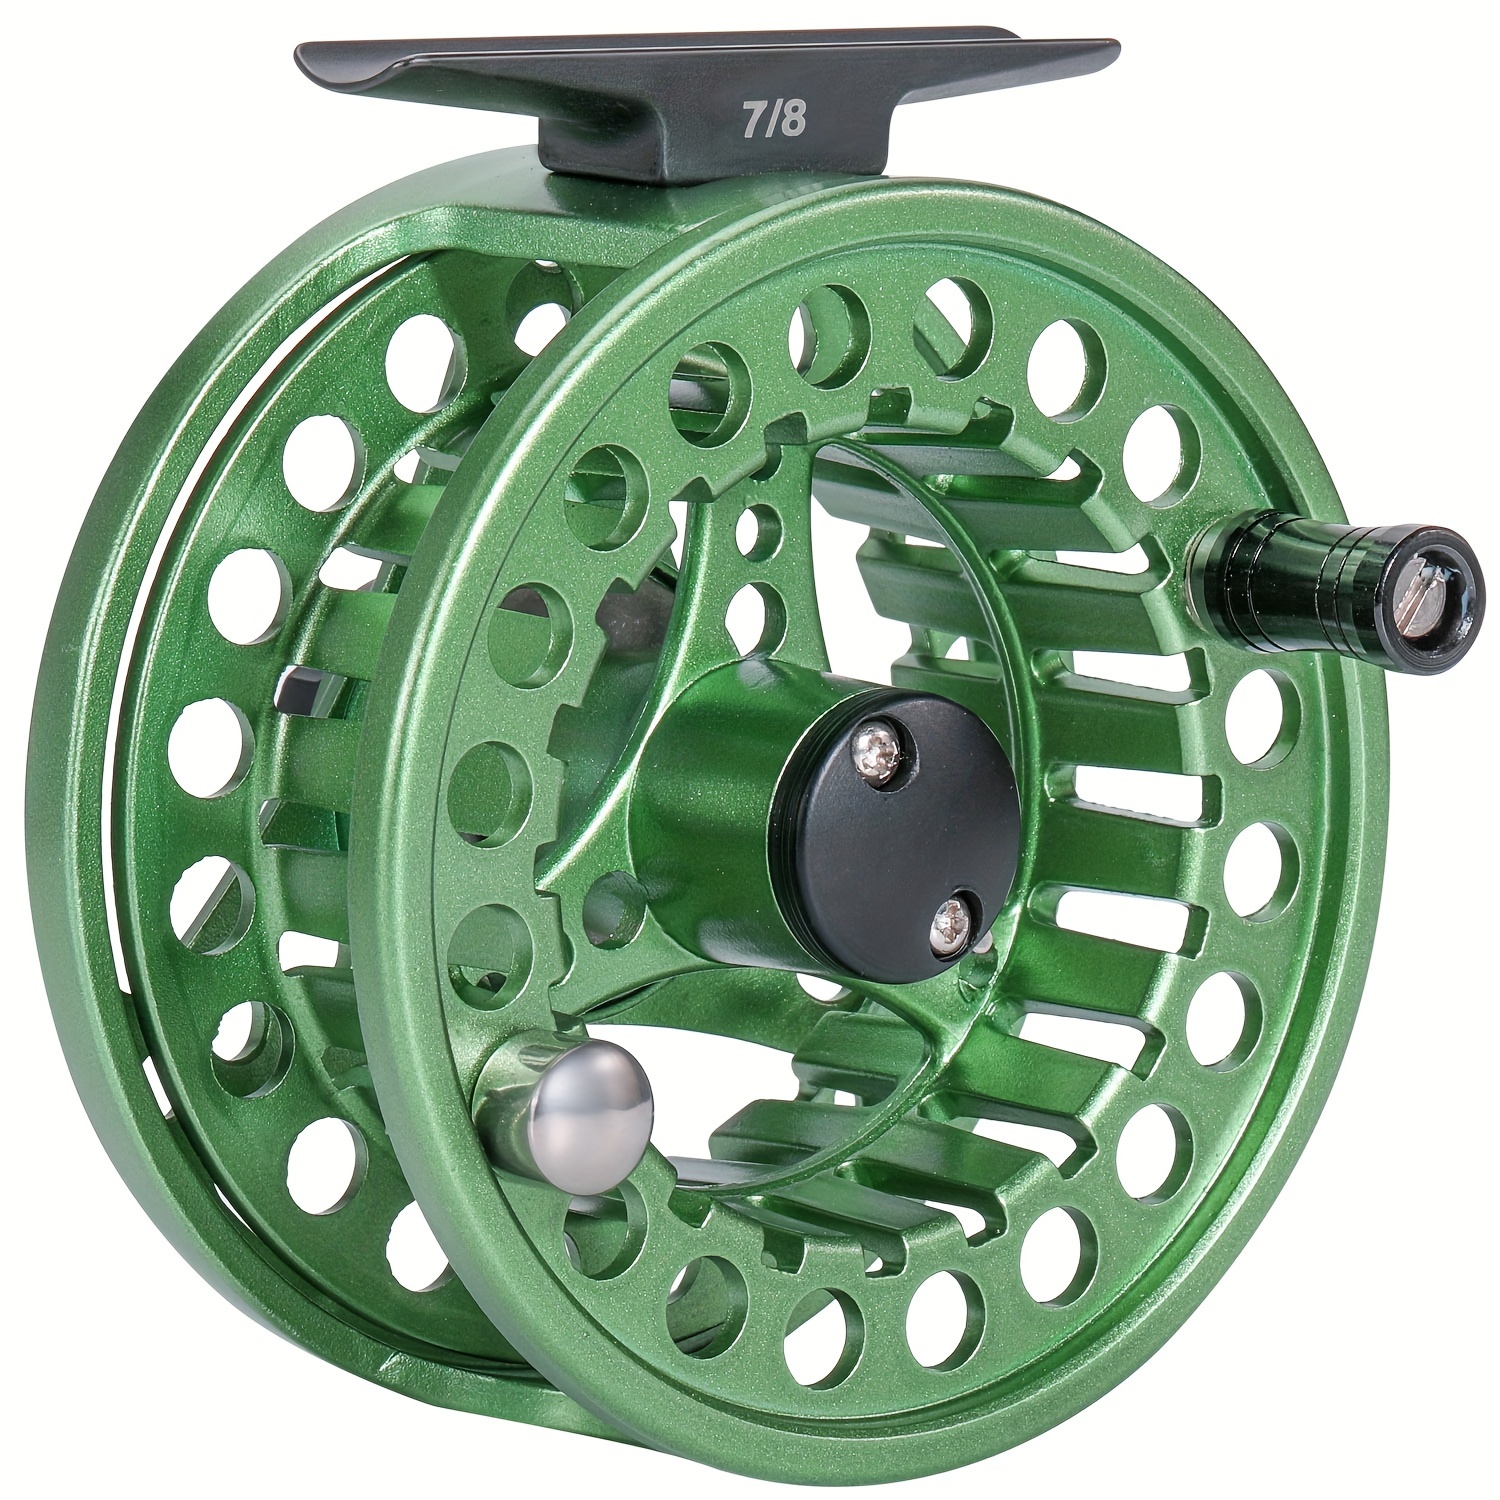 Fly Fishing Reel, Fly Reel Aluminium Alloy Hand Changed 7/8 Black Green Fly  Fishing Reel with Storage Bag for Freshwater & Saltwater Seawater, Reels -   Canada